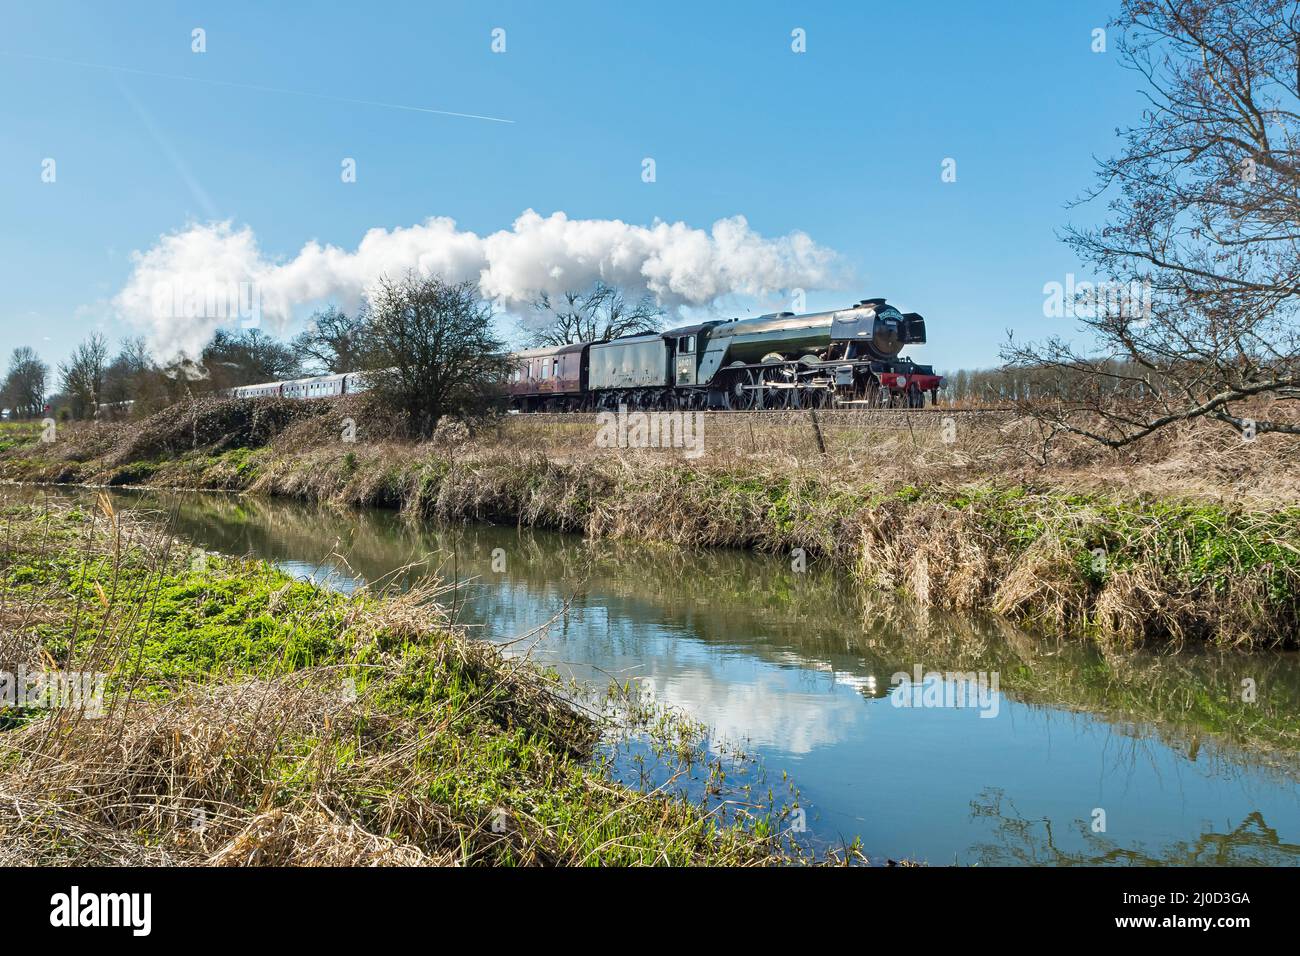 The  Flying Scotsman steam locomotive owned by the National Railway Museum passes through the Kent countryside along side the River Stour near Wye Stock Photo